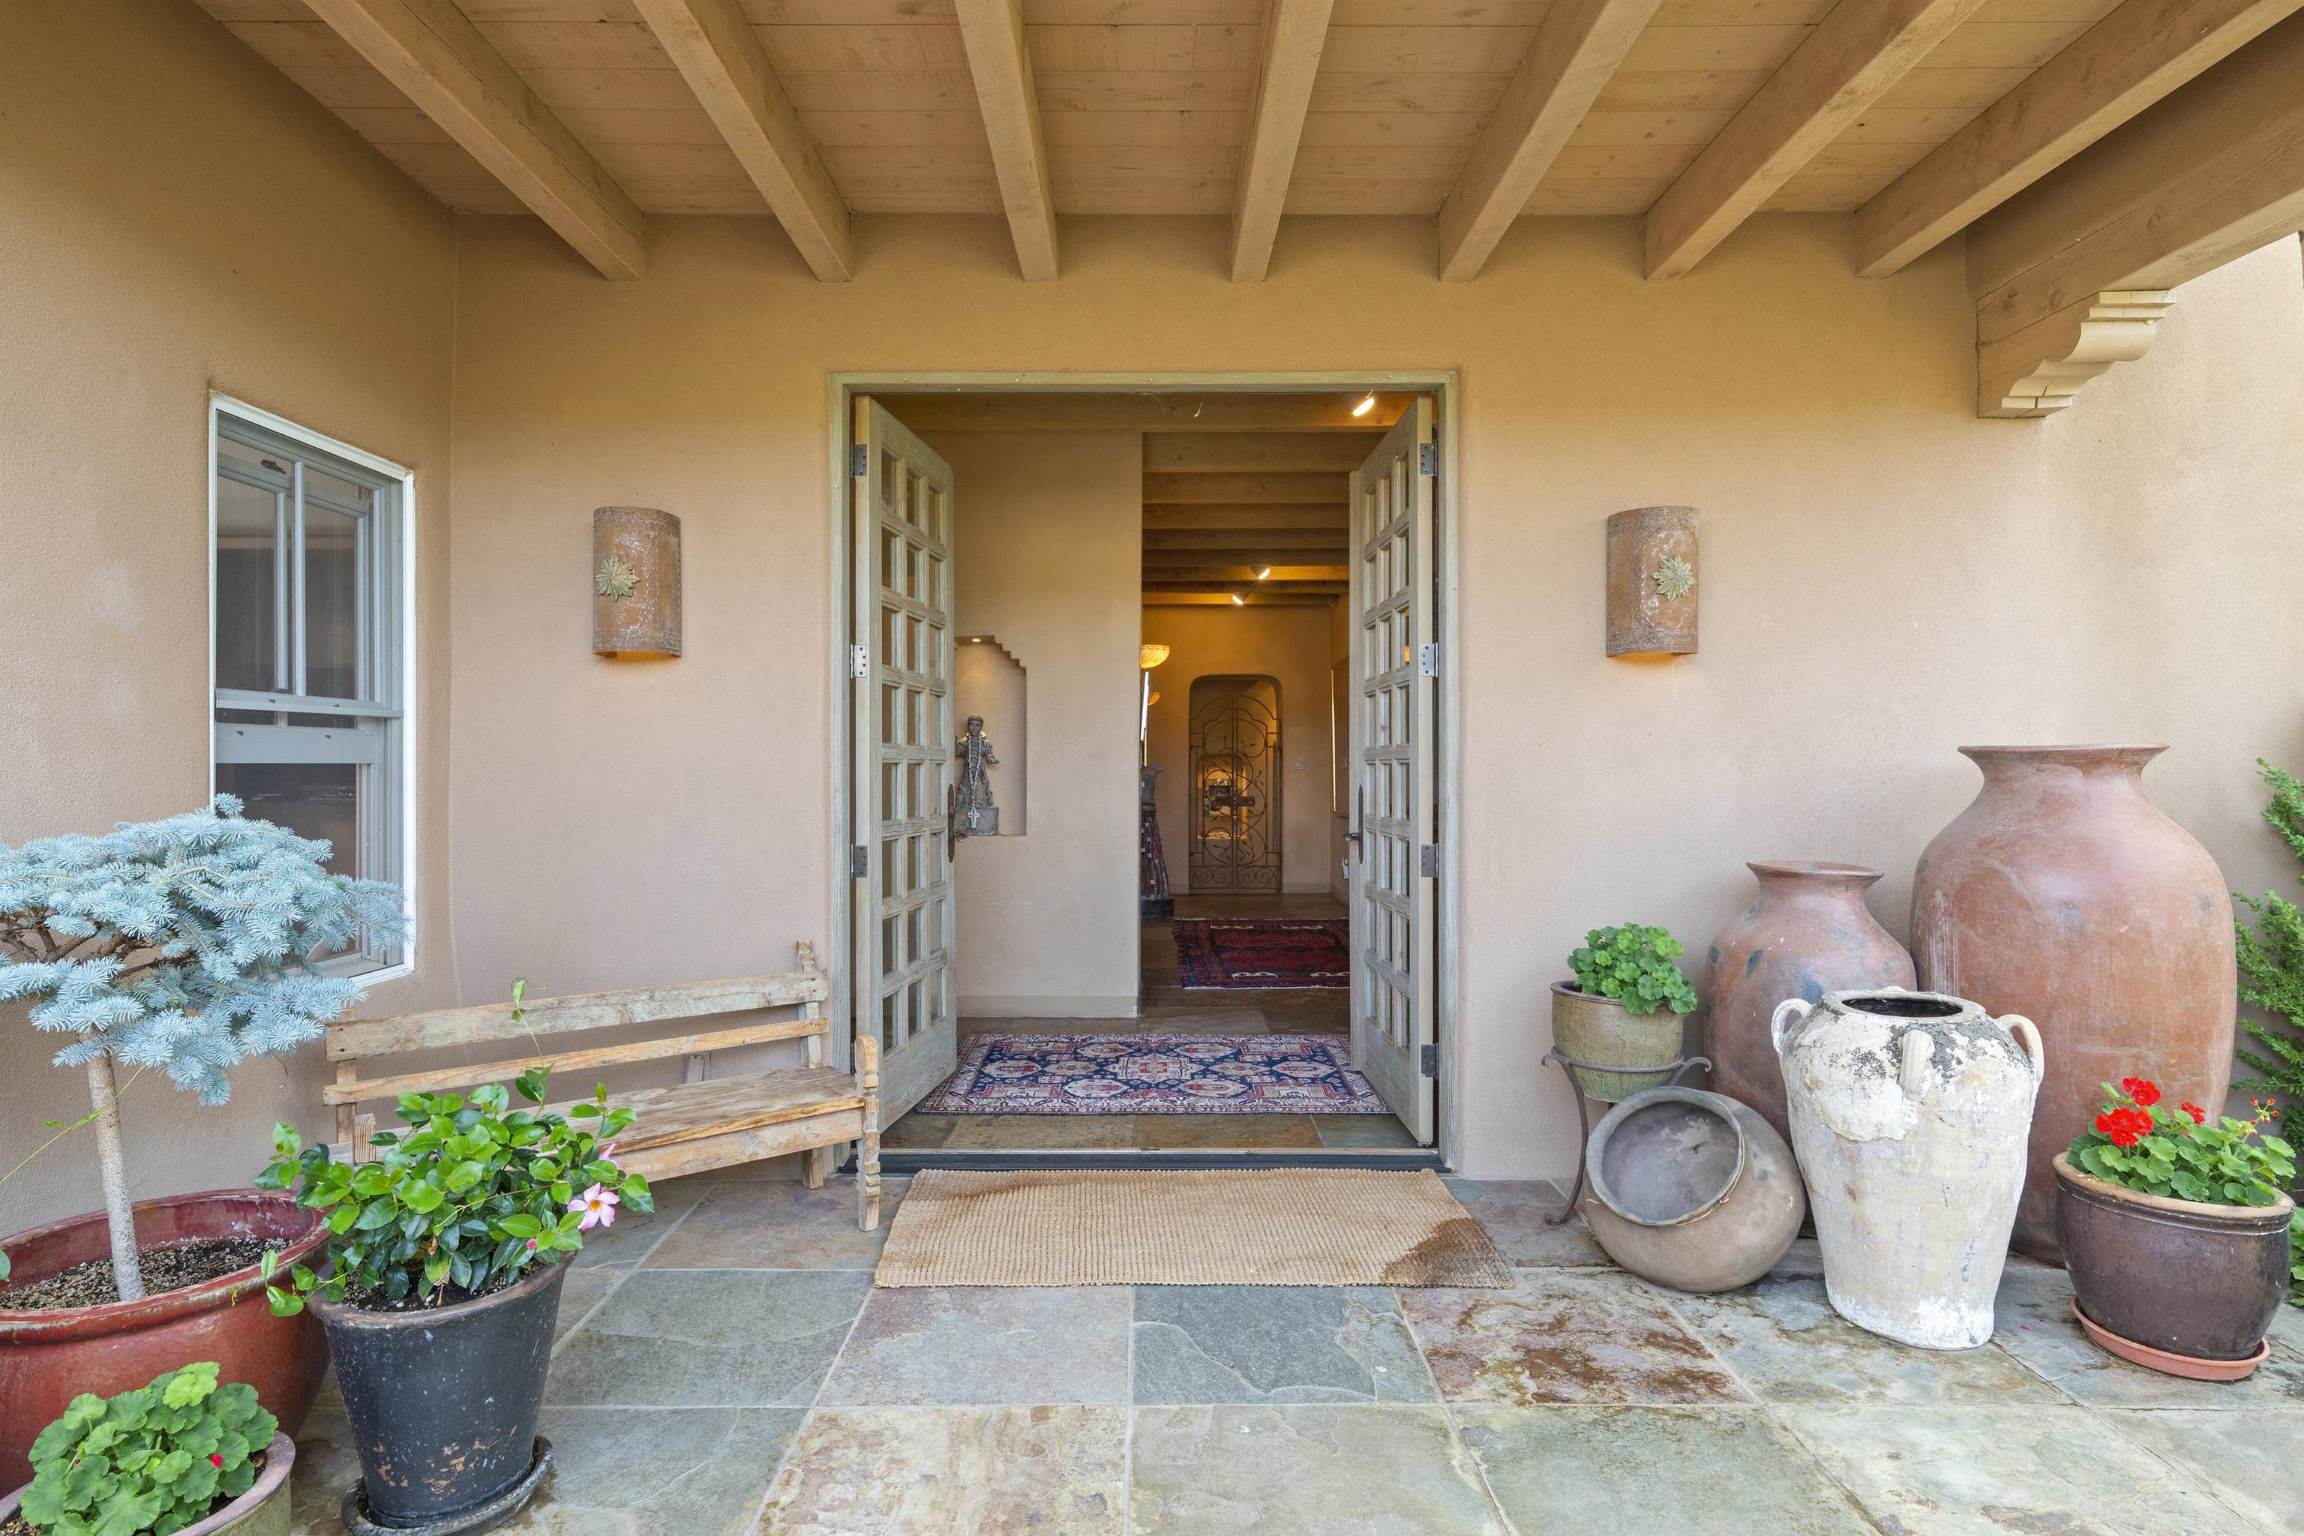 41-A Glowing Star, Santa Fe, New Mexico 87506, 3 Bedrooms Bedrooms, ,3 BathroomsBathrooms,Residential,For Sale,41-A Glowing Star,202104155